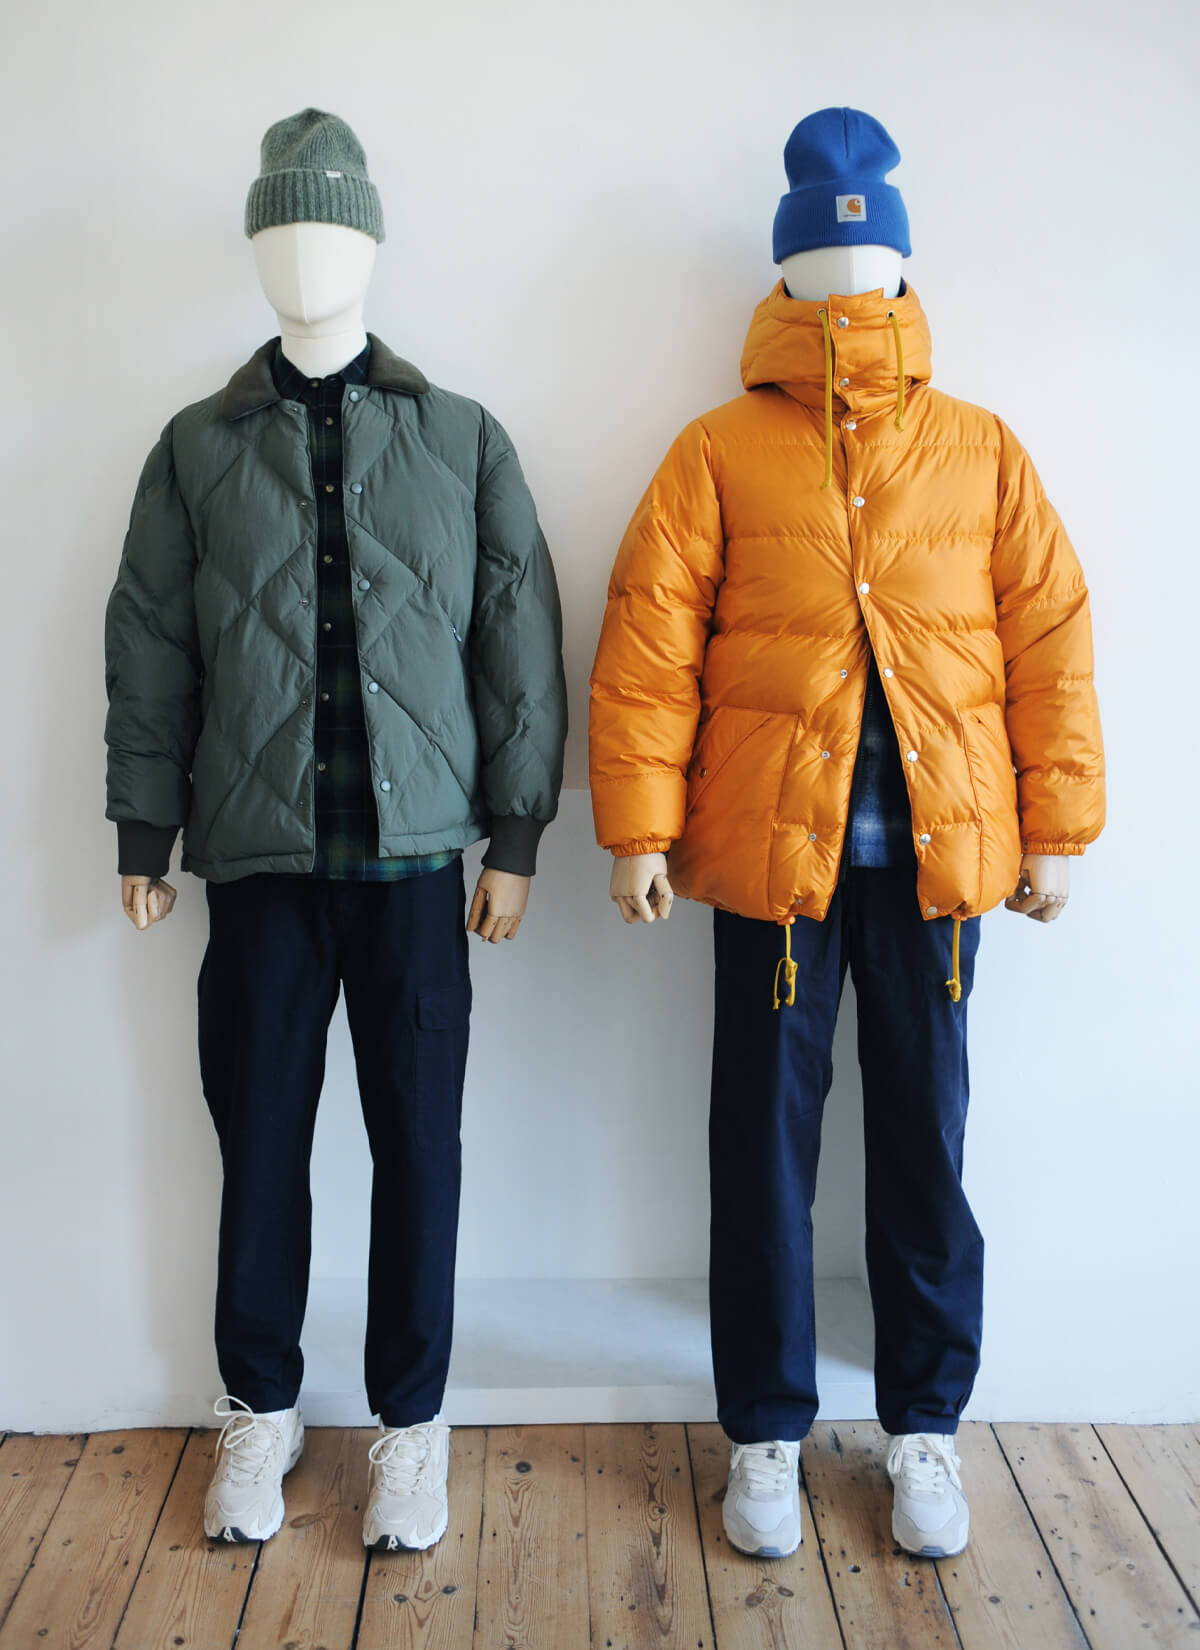 Two mannequins styled with investment jackets for the festive season.